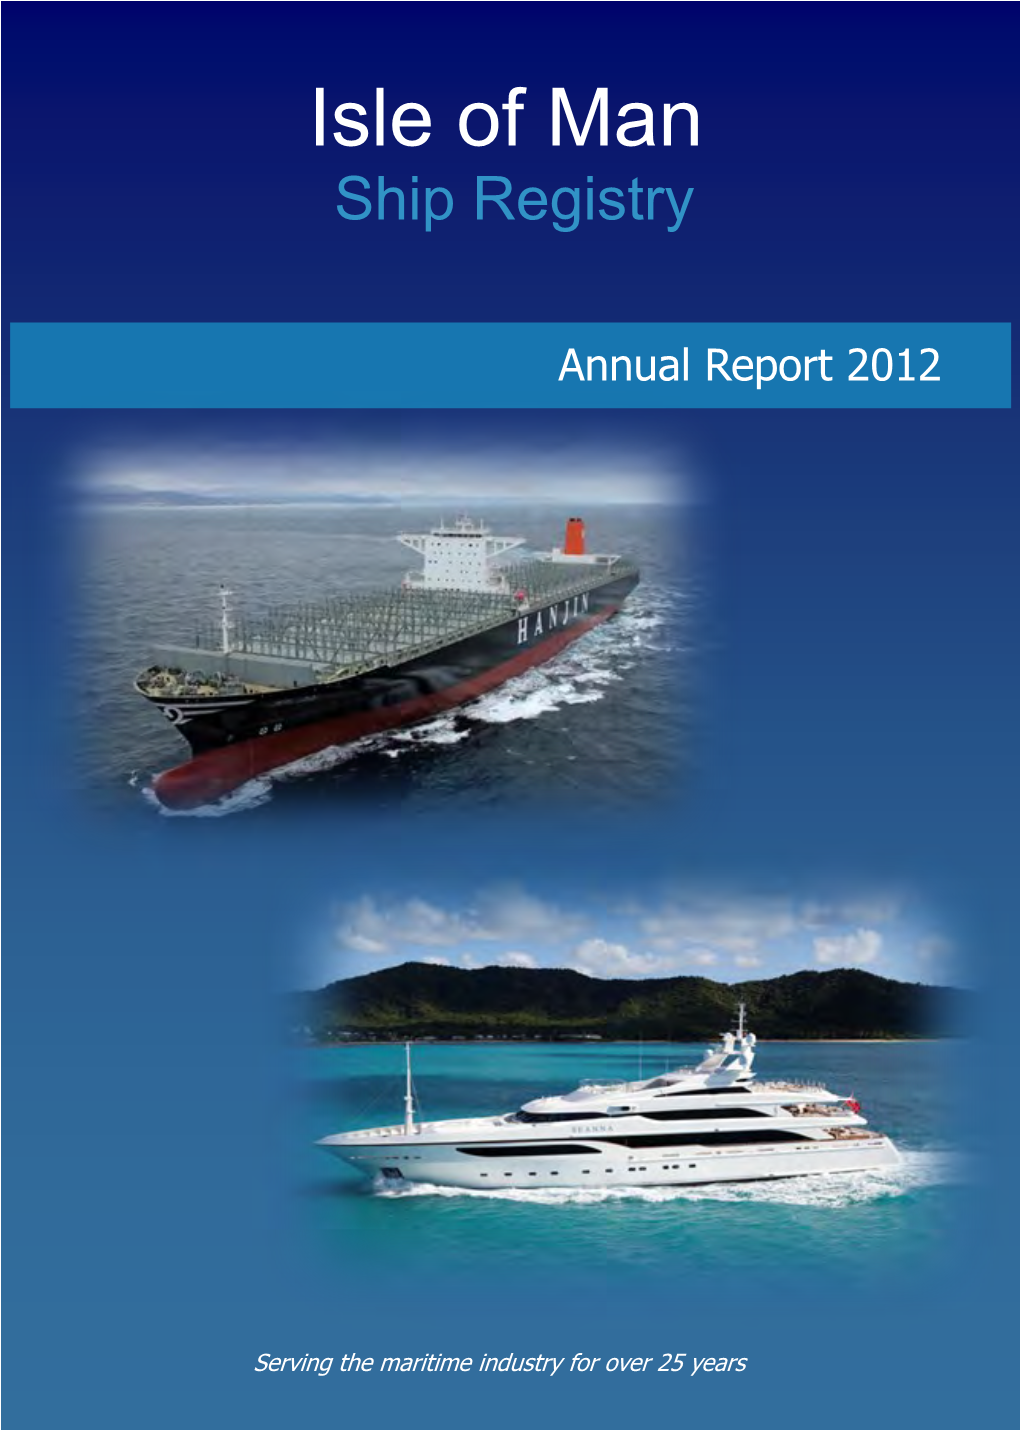 2012 Annual Report Can Be Provided in Large Print, on Request